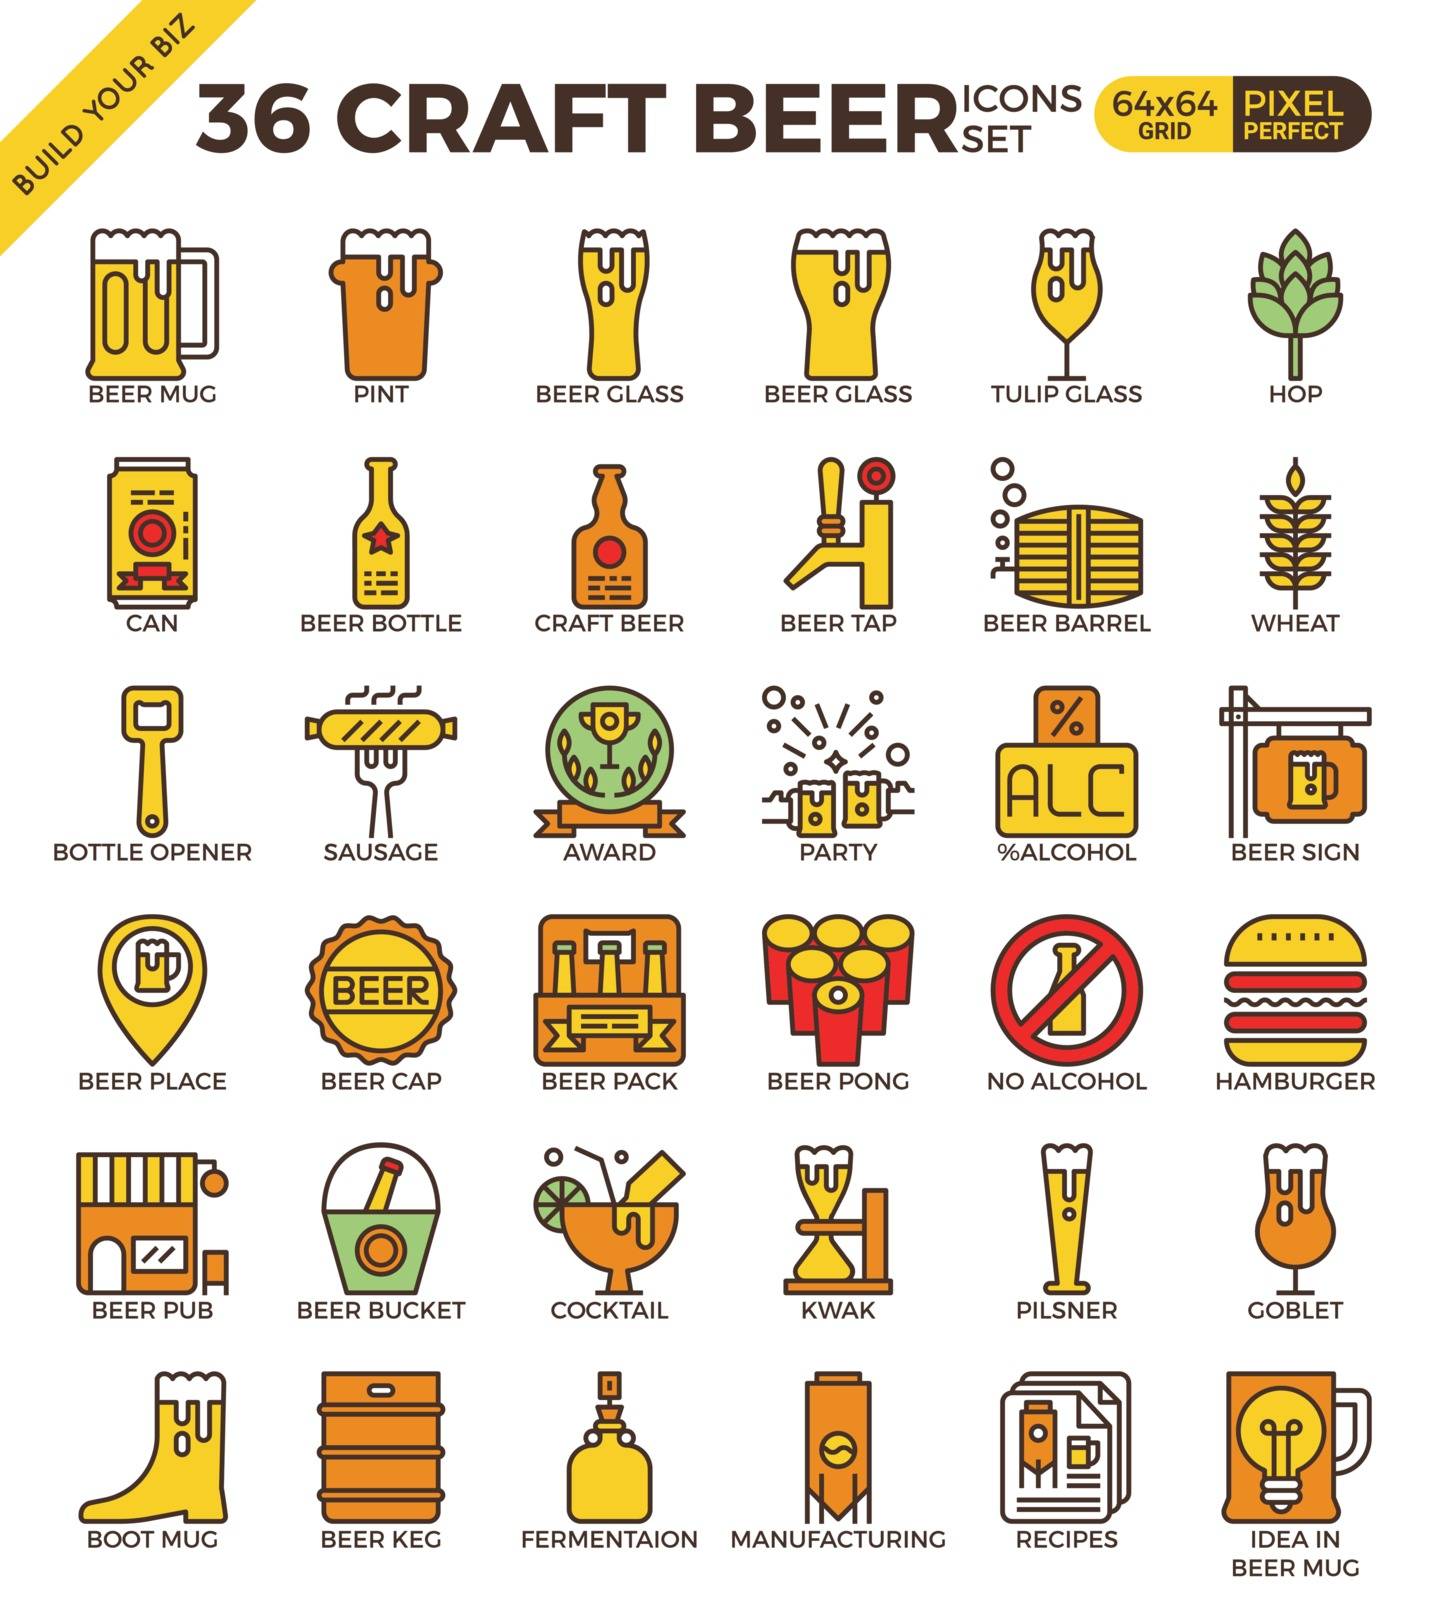 Craft Beer icons by nongpimmy